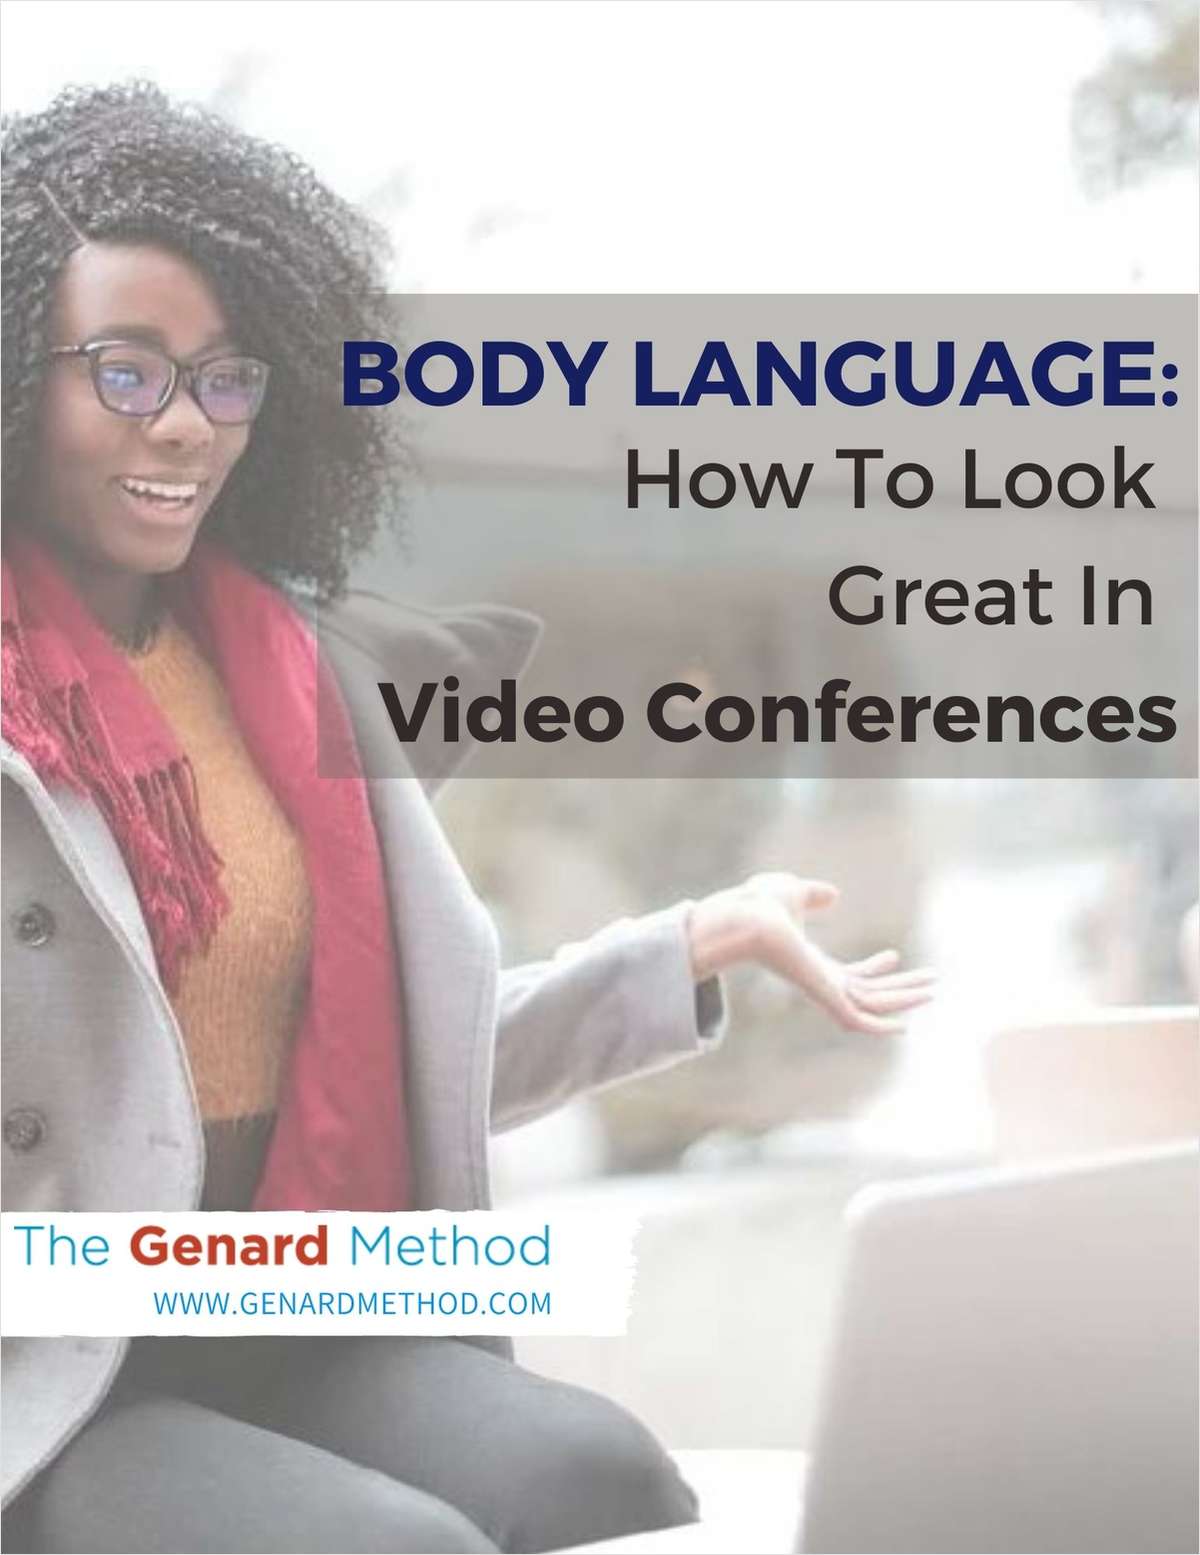 Body Language: How to Look Great in Video Conferences